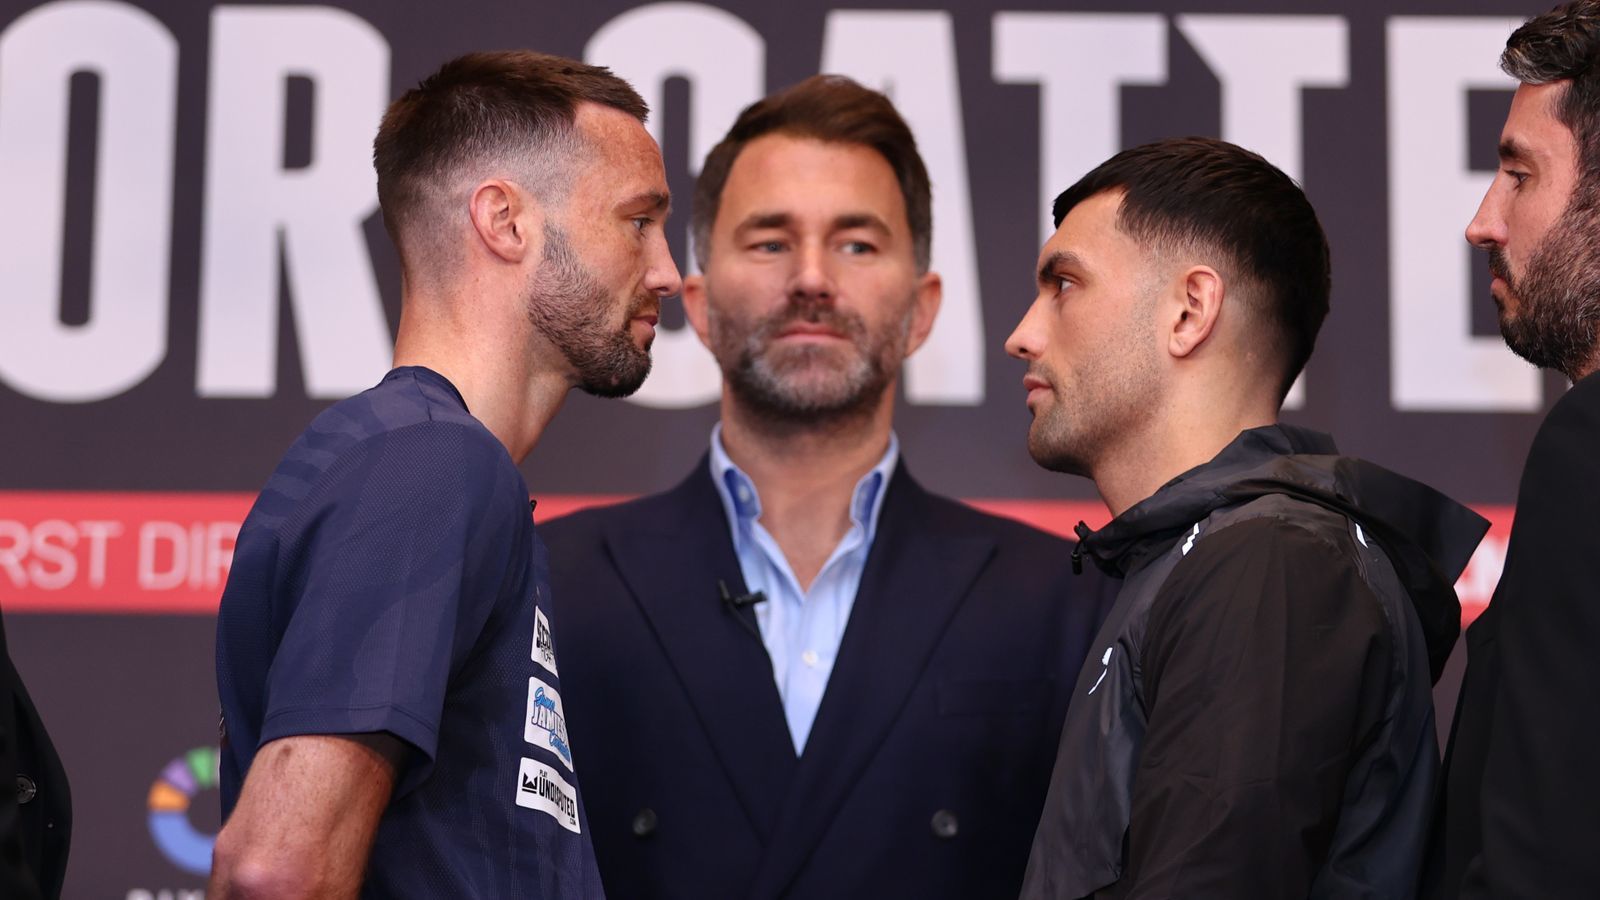 Josh Taylor vs. Jack Catterall II: Preview, Where to Watch and Betting Odds